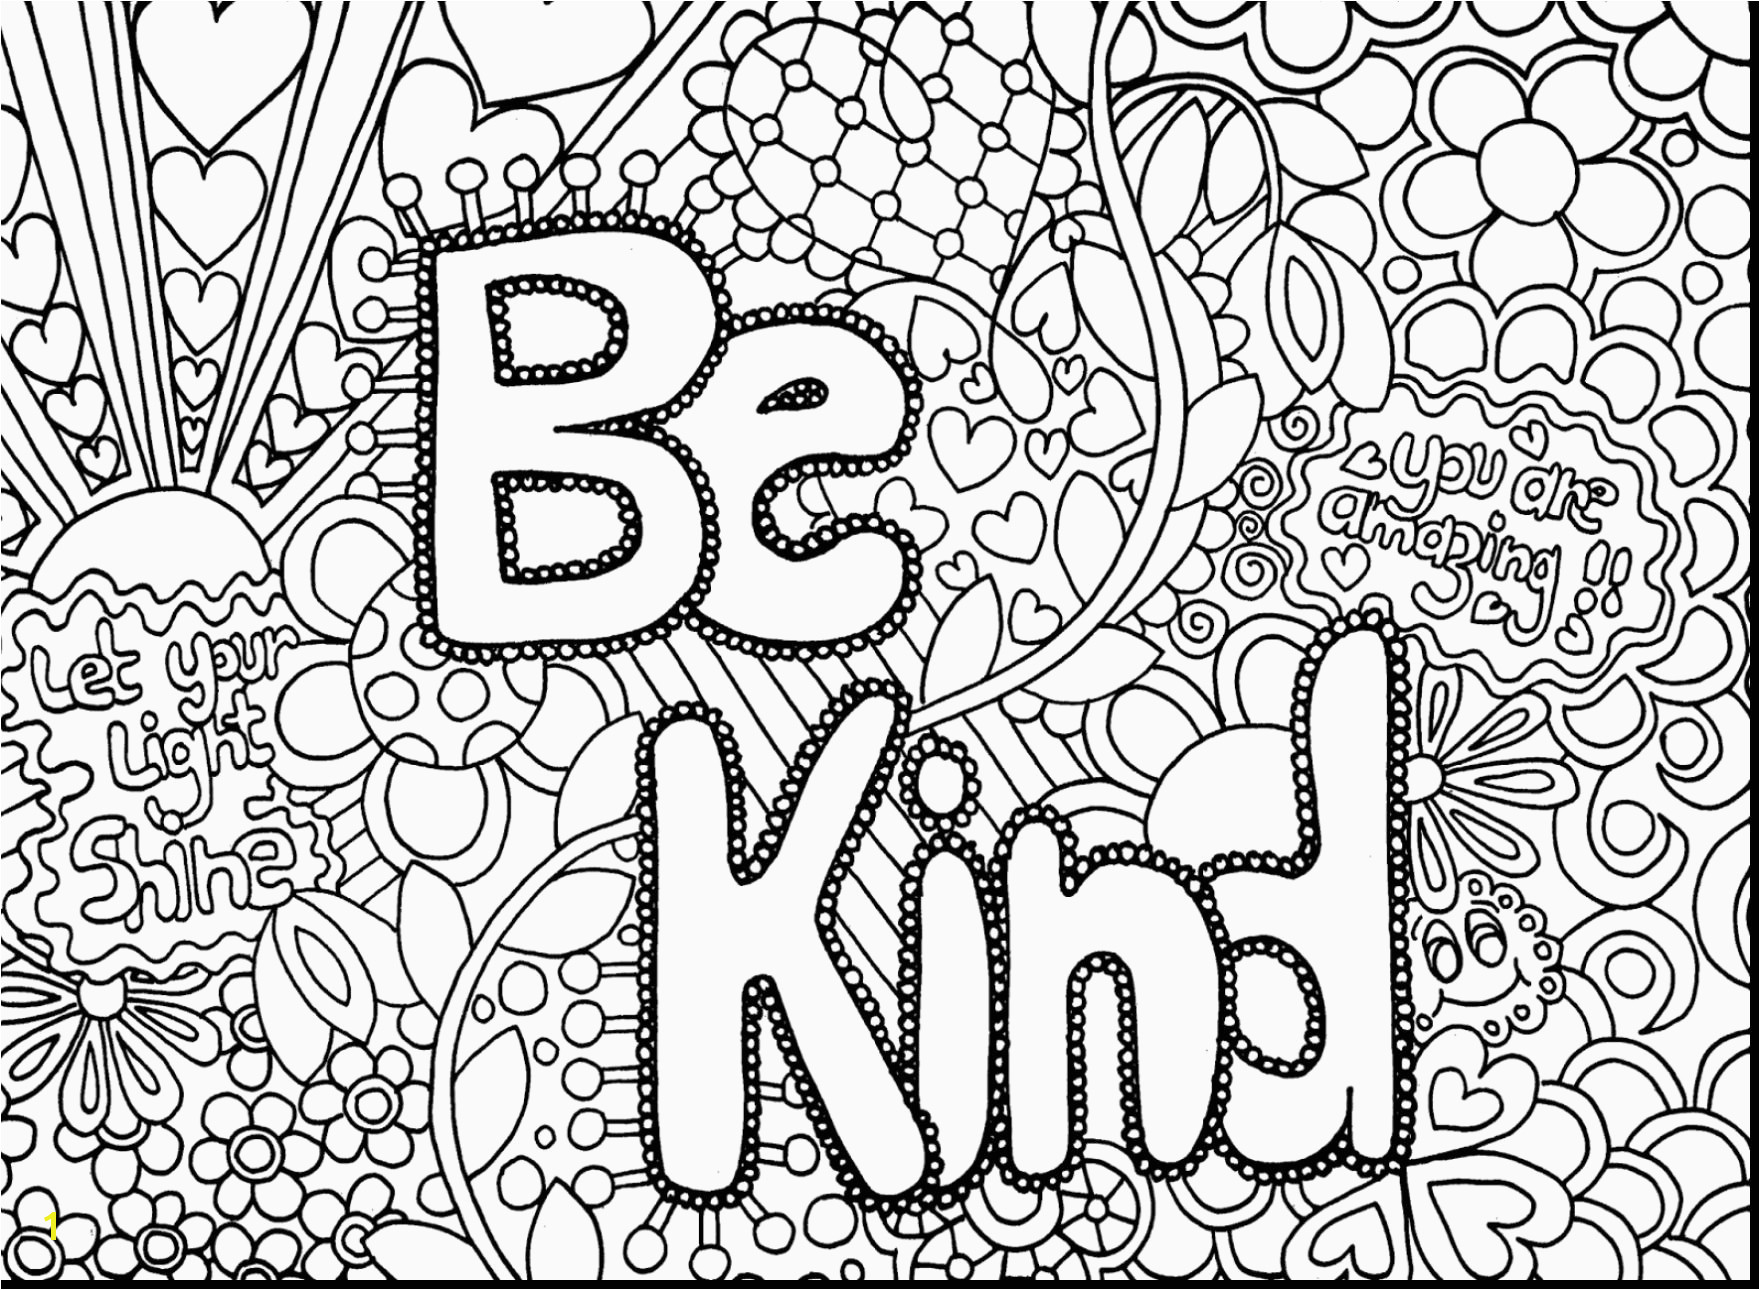 Coloring Pages Hard Unique Hard Coloring Sheet Collection